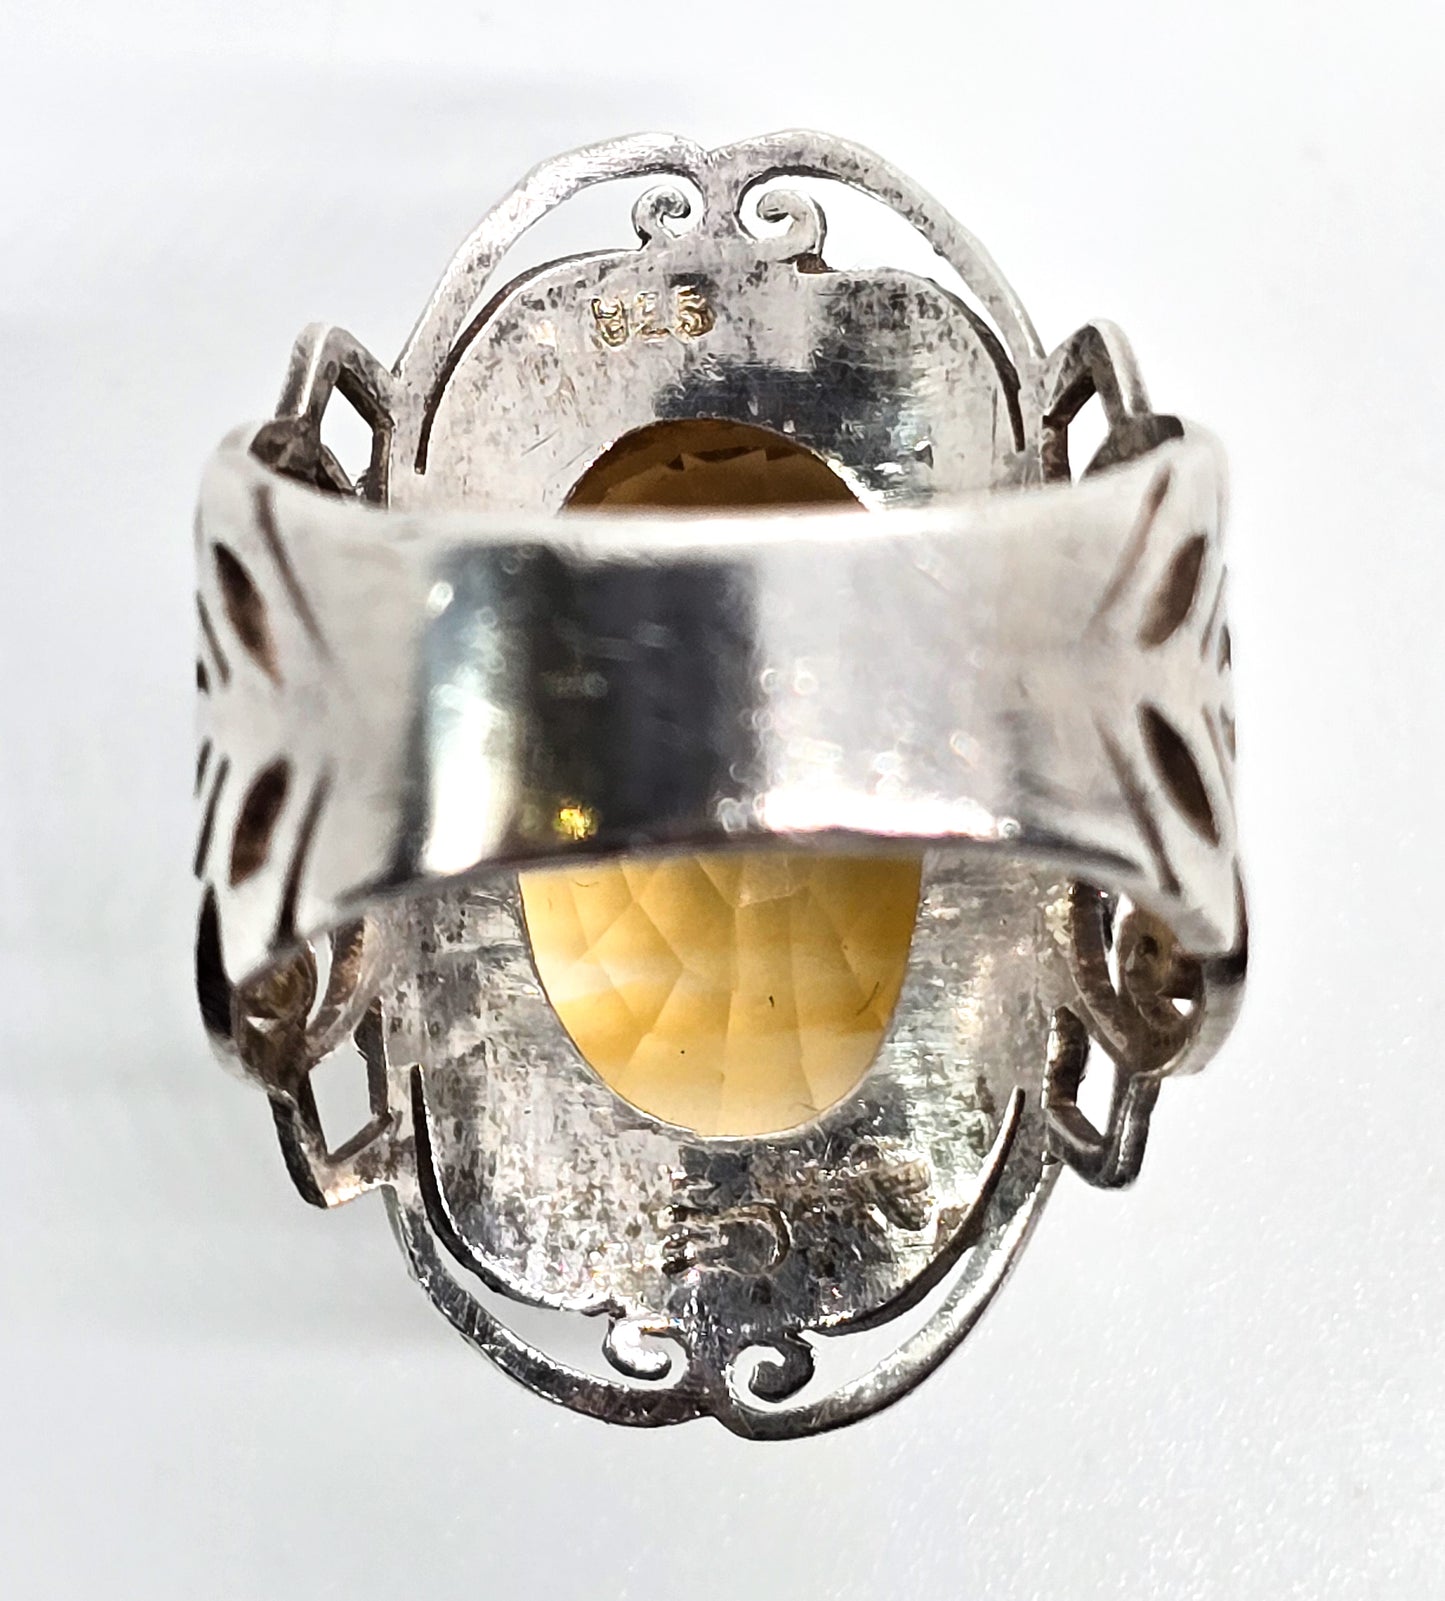 Large Faceted Citrine 15ct Bali Filigree open work sterling silver ring size 7 and 1/2